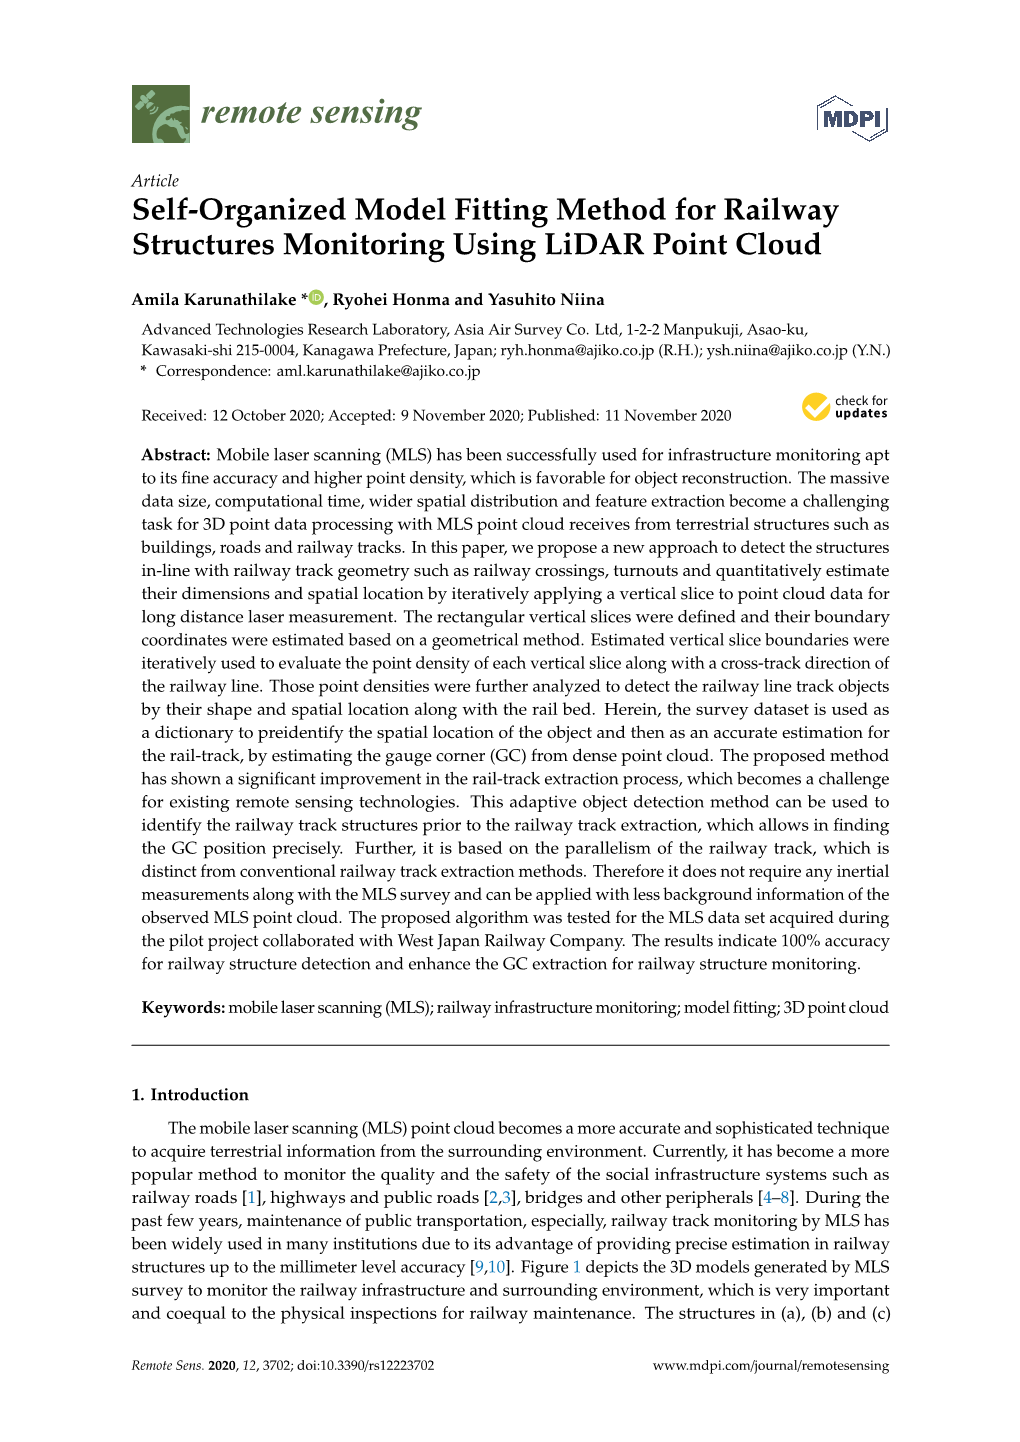 Self-Organized Model Fitting Method for Railway Structures Monitoring Using Lidar Point Cloud